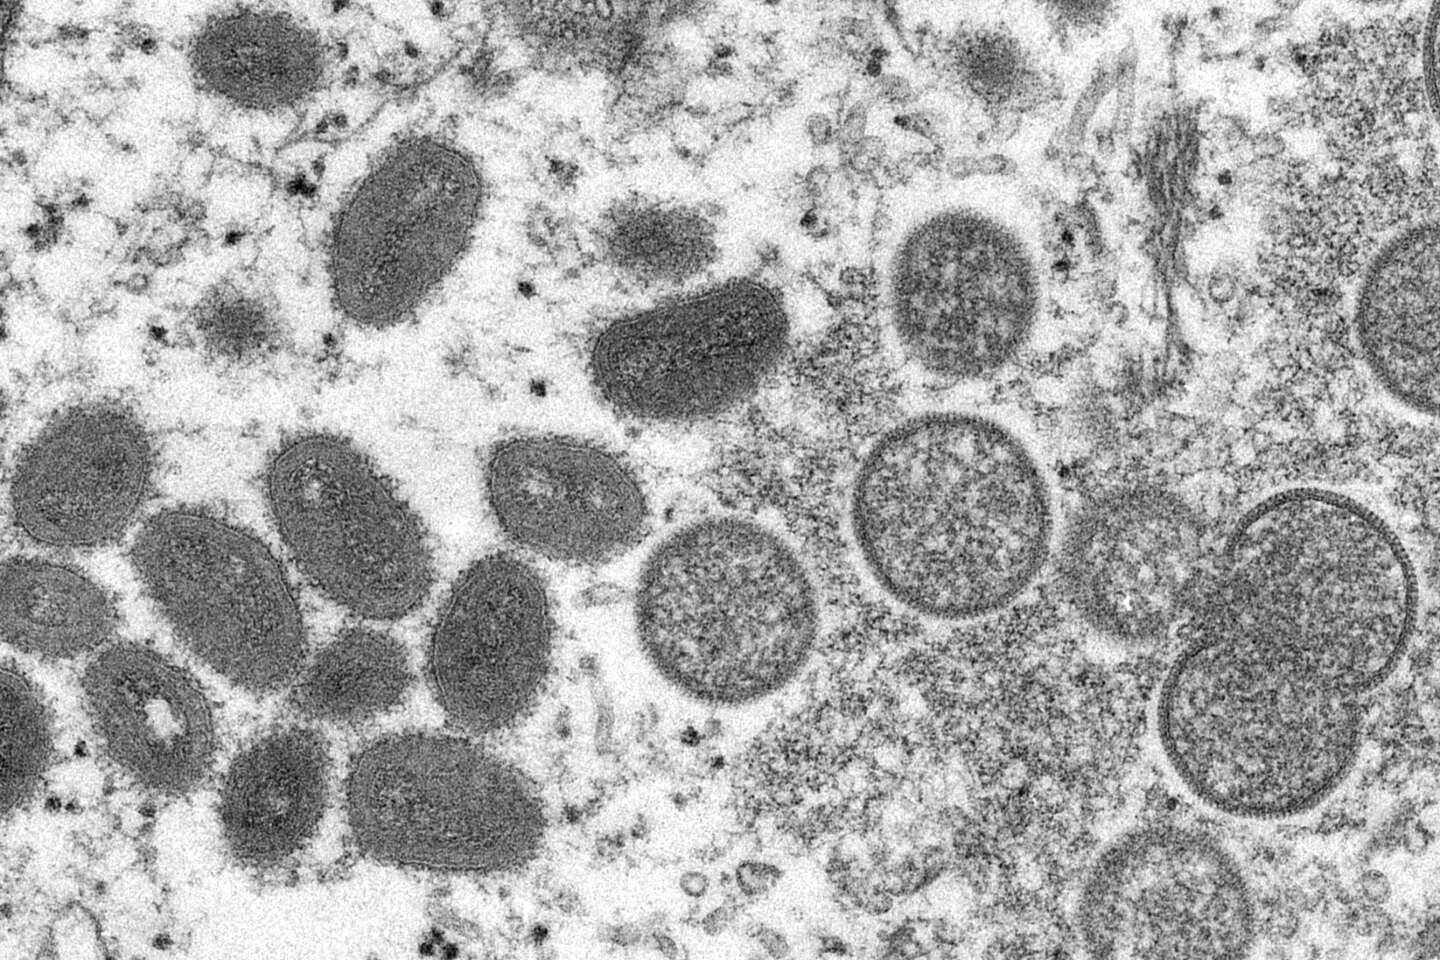 What we know about the “Langya” virus spotted in China